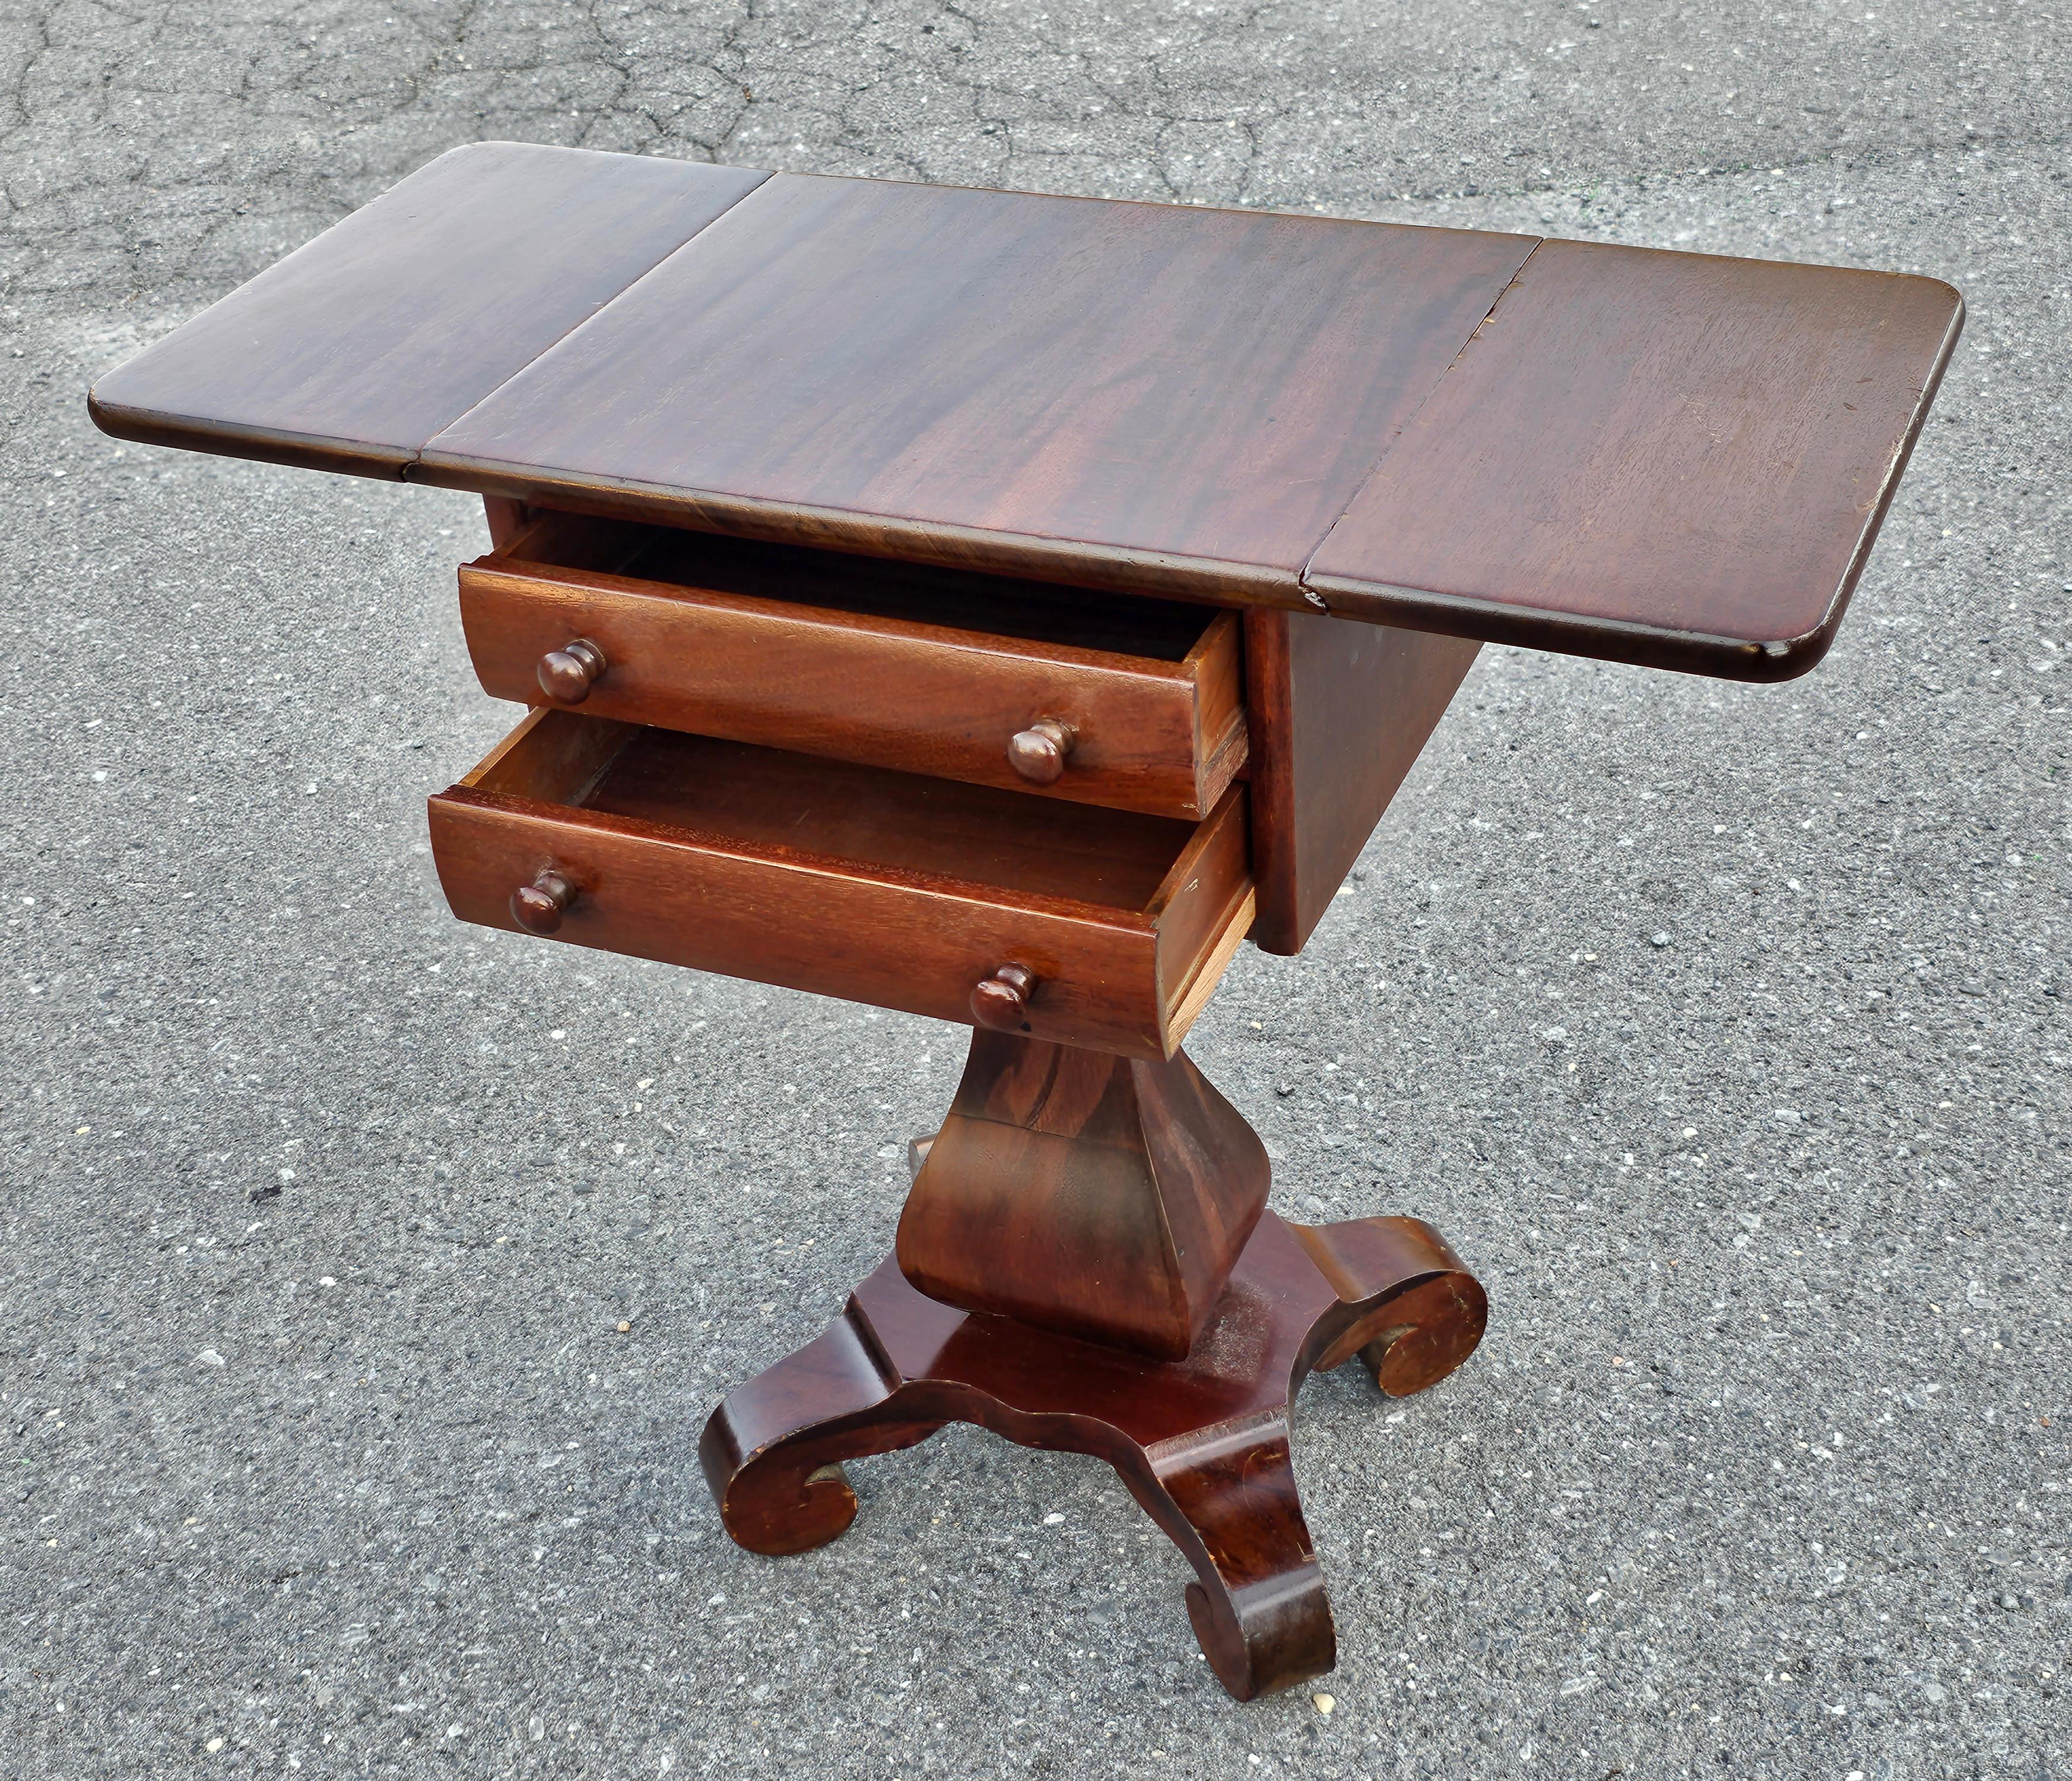 Early 20th Century American Empire Mahogany Drop Leaf Side Table By Imperial  In Good Condition For Sale In Germantown, MD